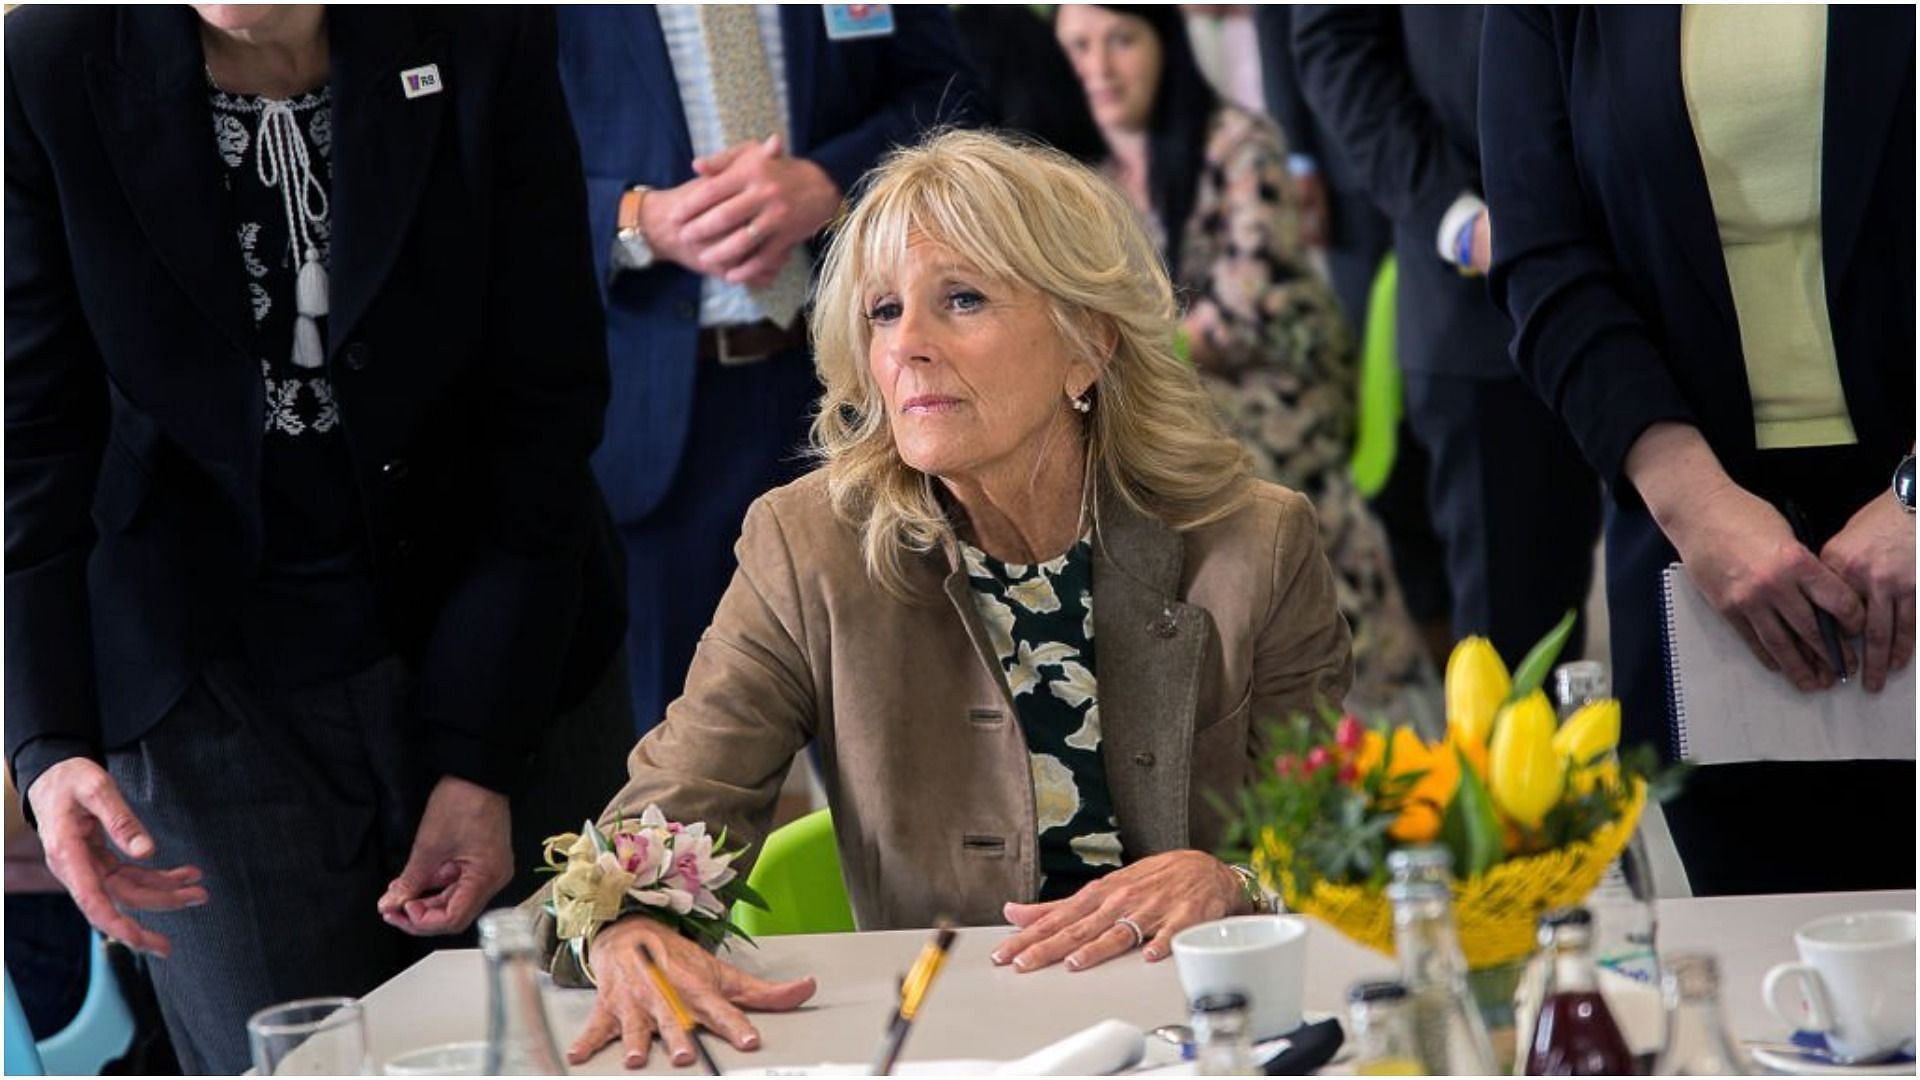 Jill Biden showed her support for the Ukrainian people and visited a school that is currently a temporary shelter (Image via Zuzana Gogova/Getty Images)